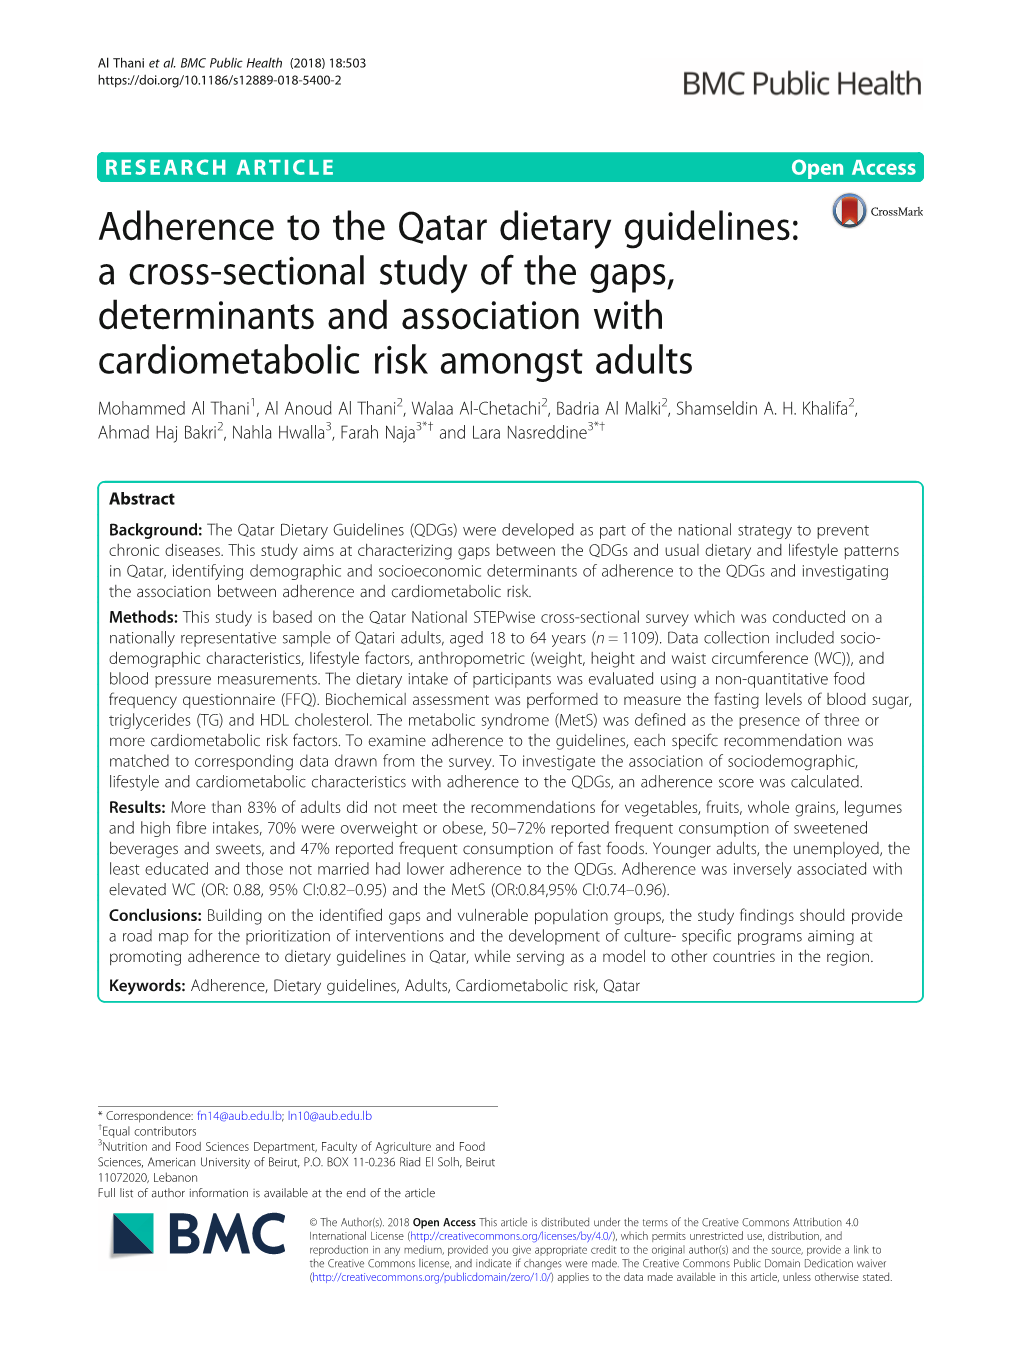 Adherence to the Qatar Dietary Guidelines: a Cross-Sectional Study